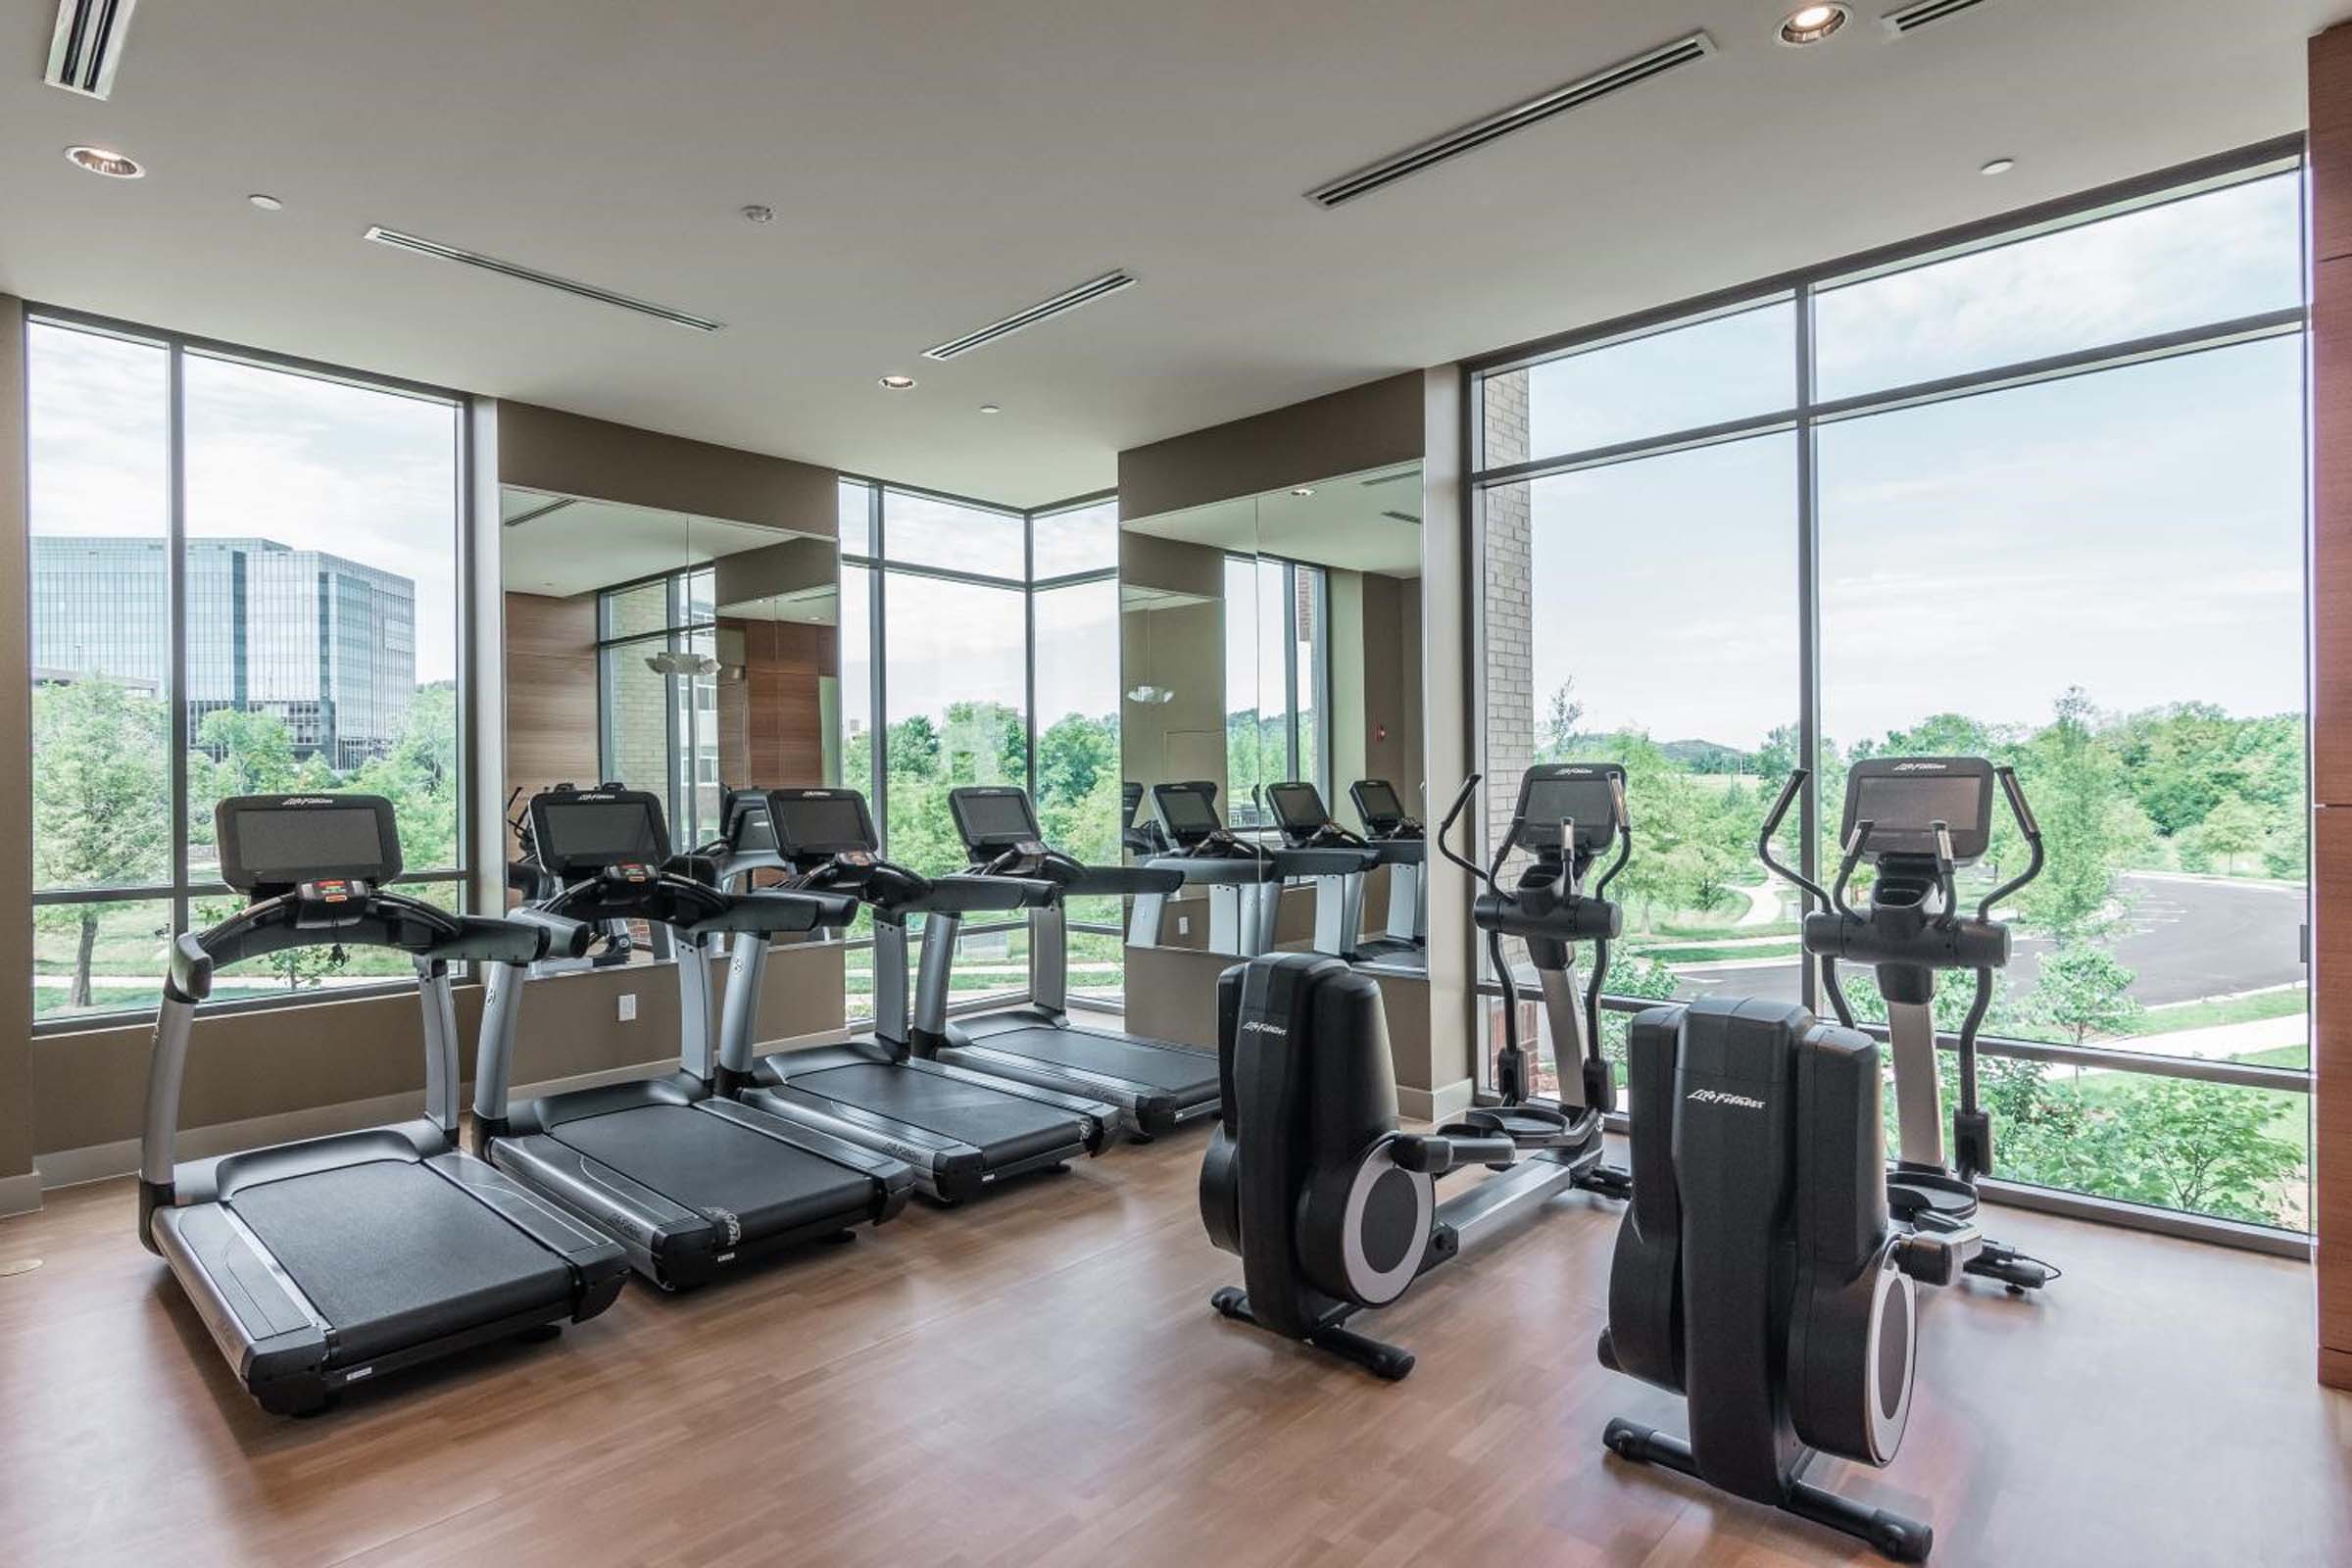 Two-story fitness center with cardio equipment and incredible views